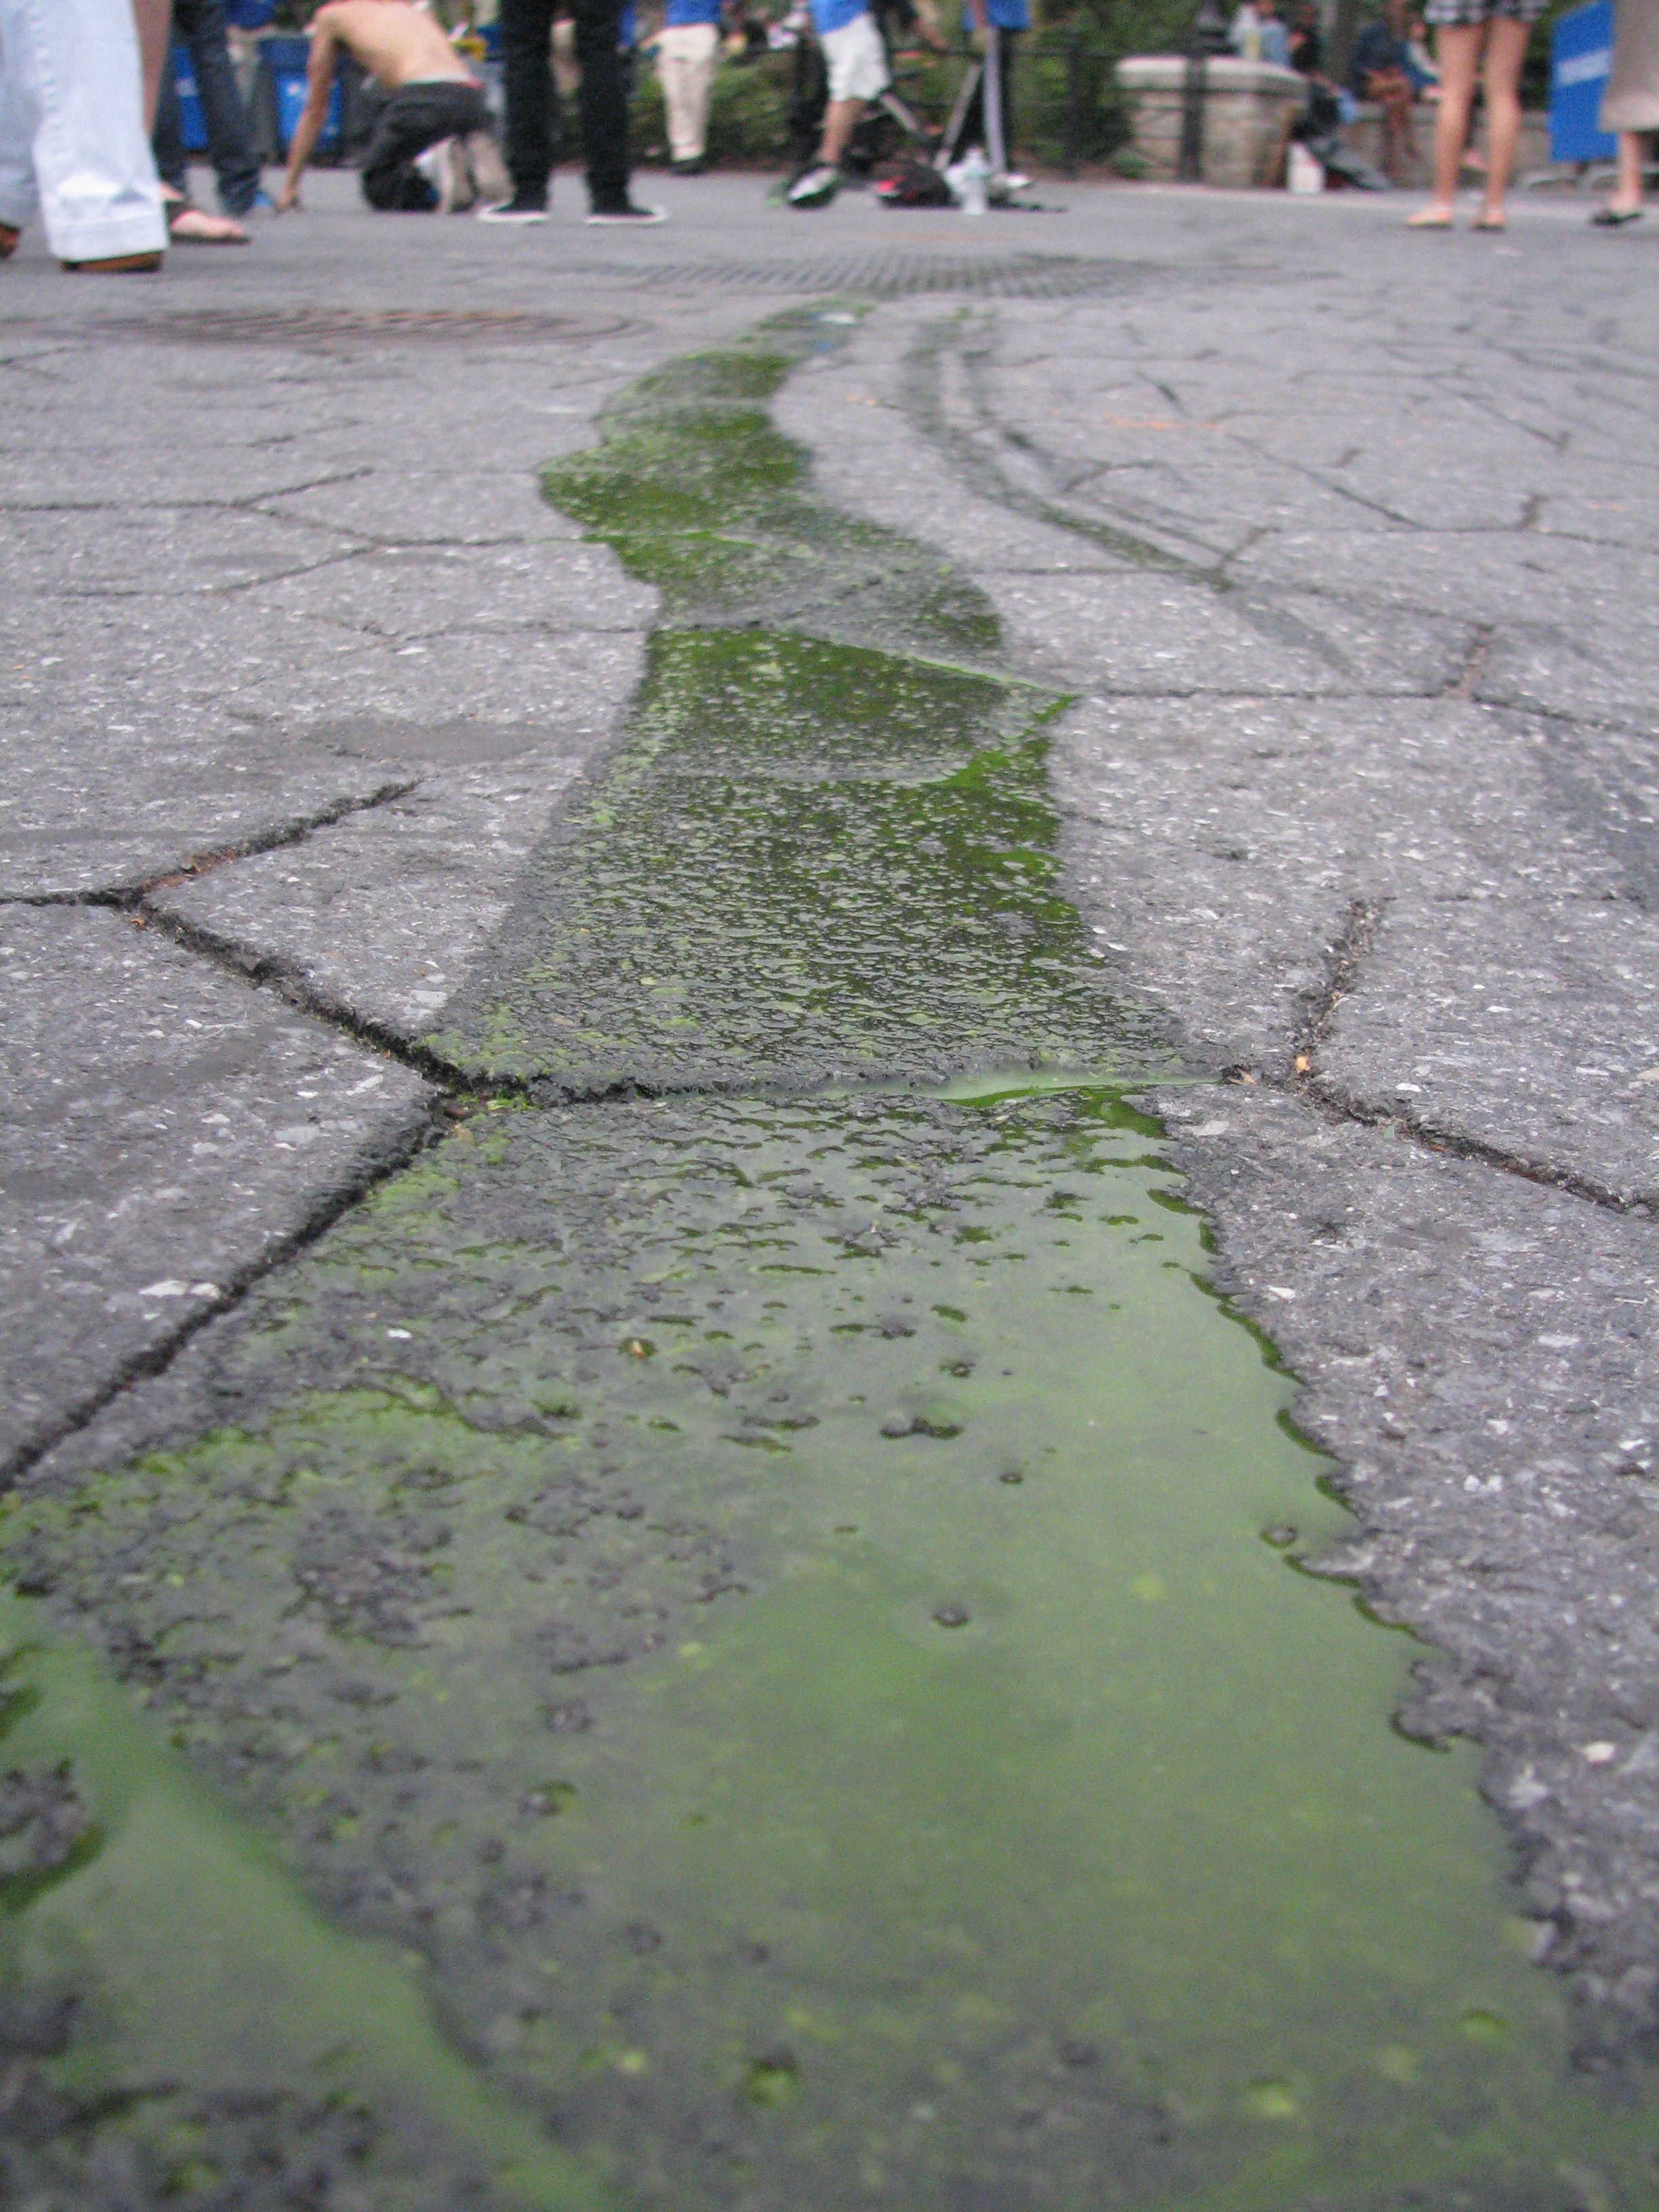 Trail of green slime left behind by garbage carried away